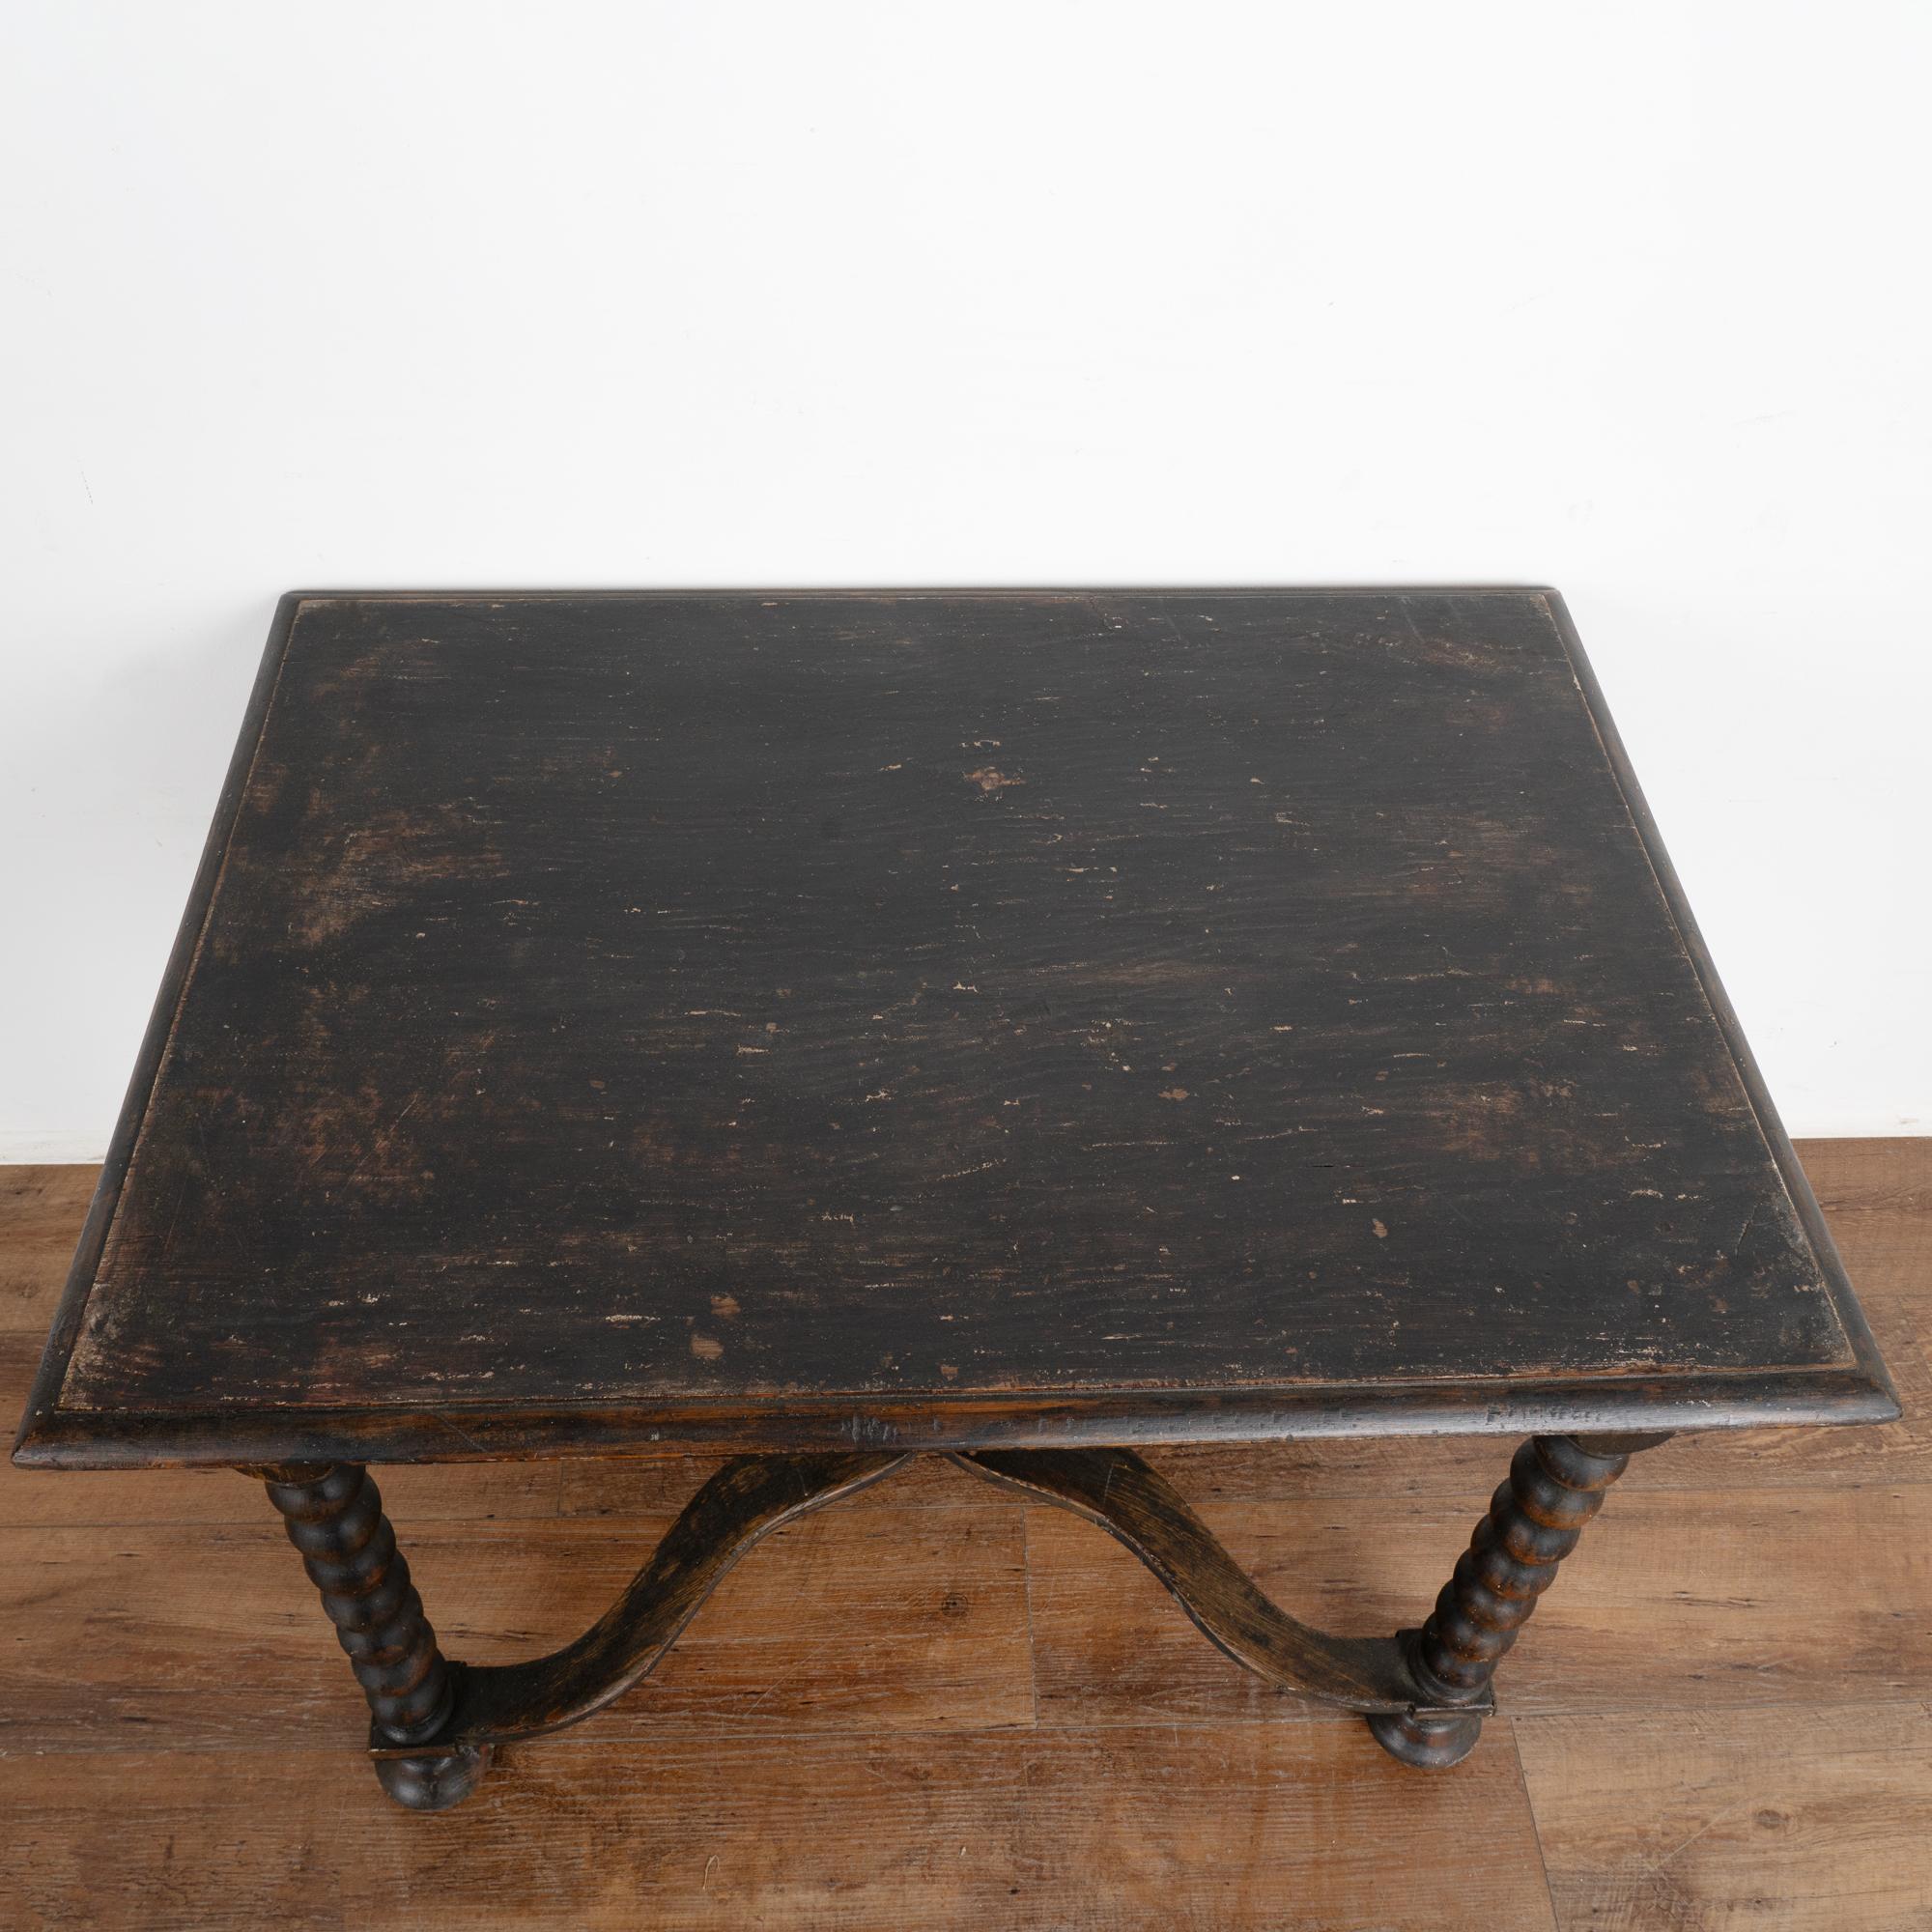 Swedish Black Painted Side Table With Turned Legs, Sweden circa 1840